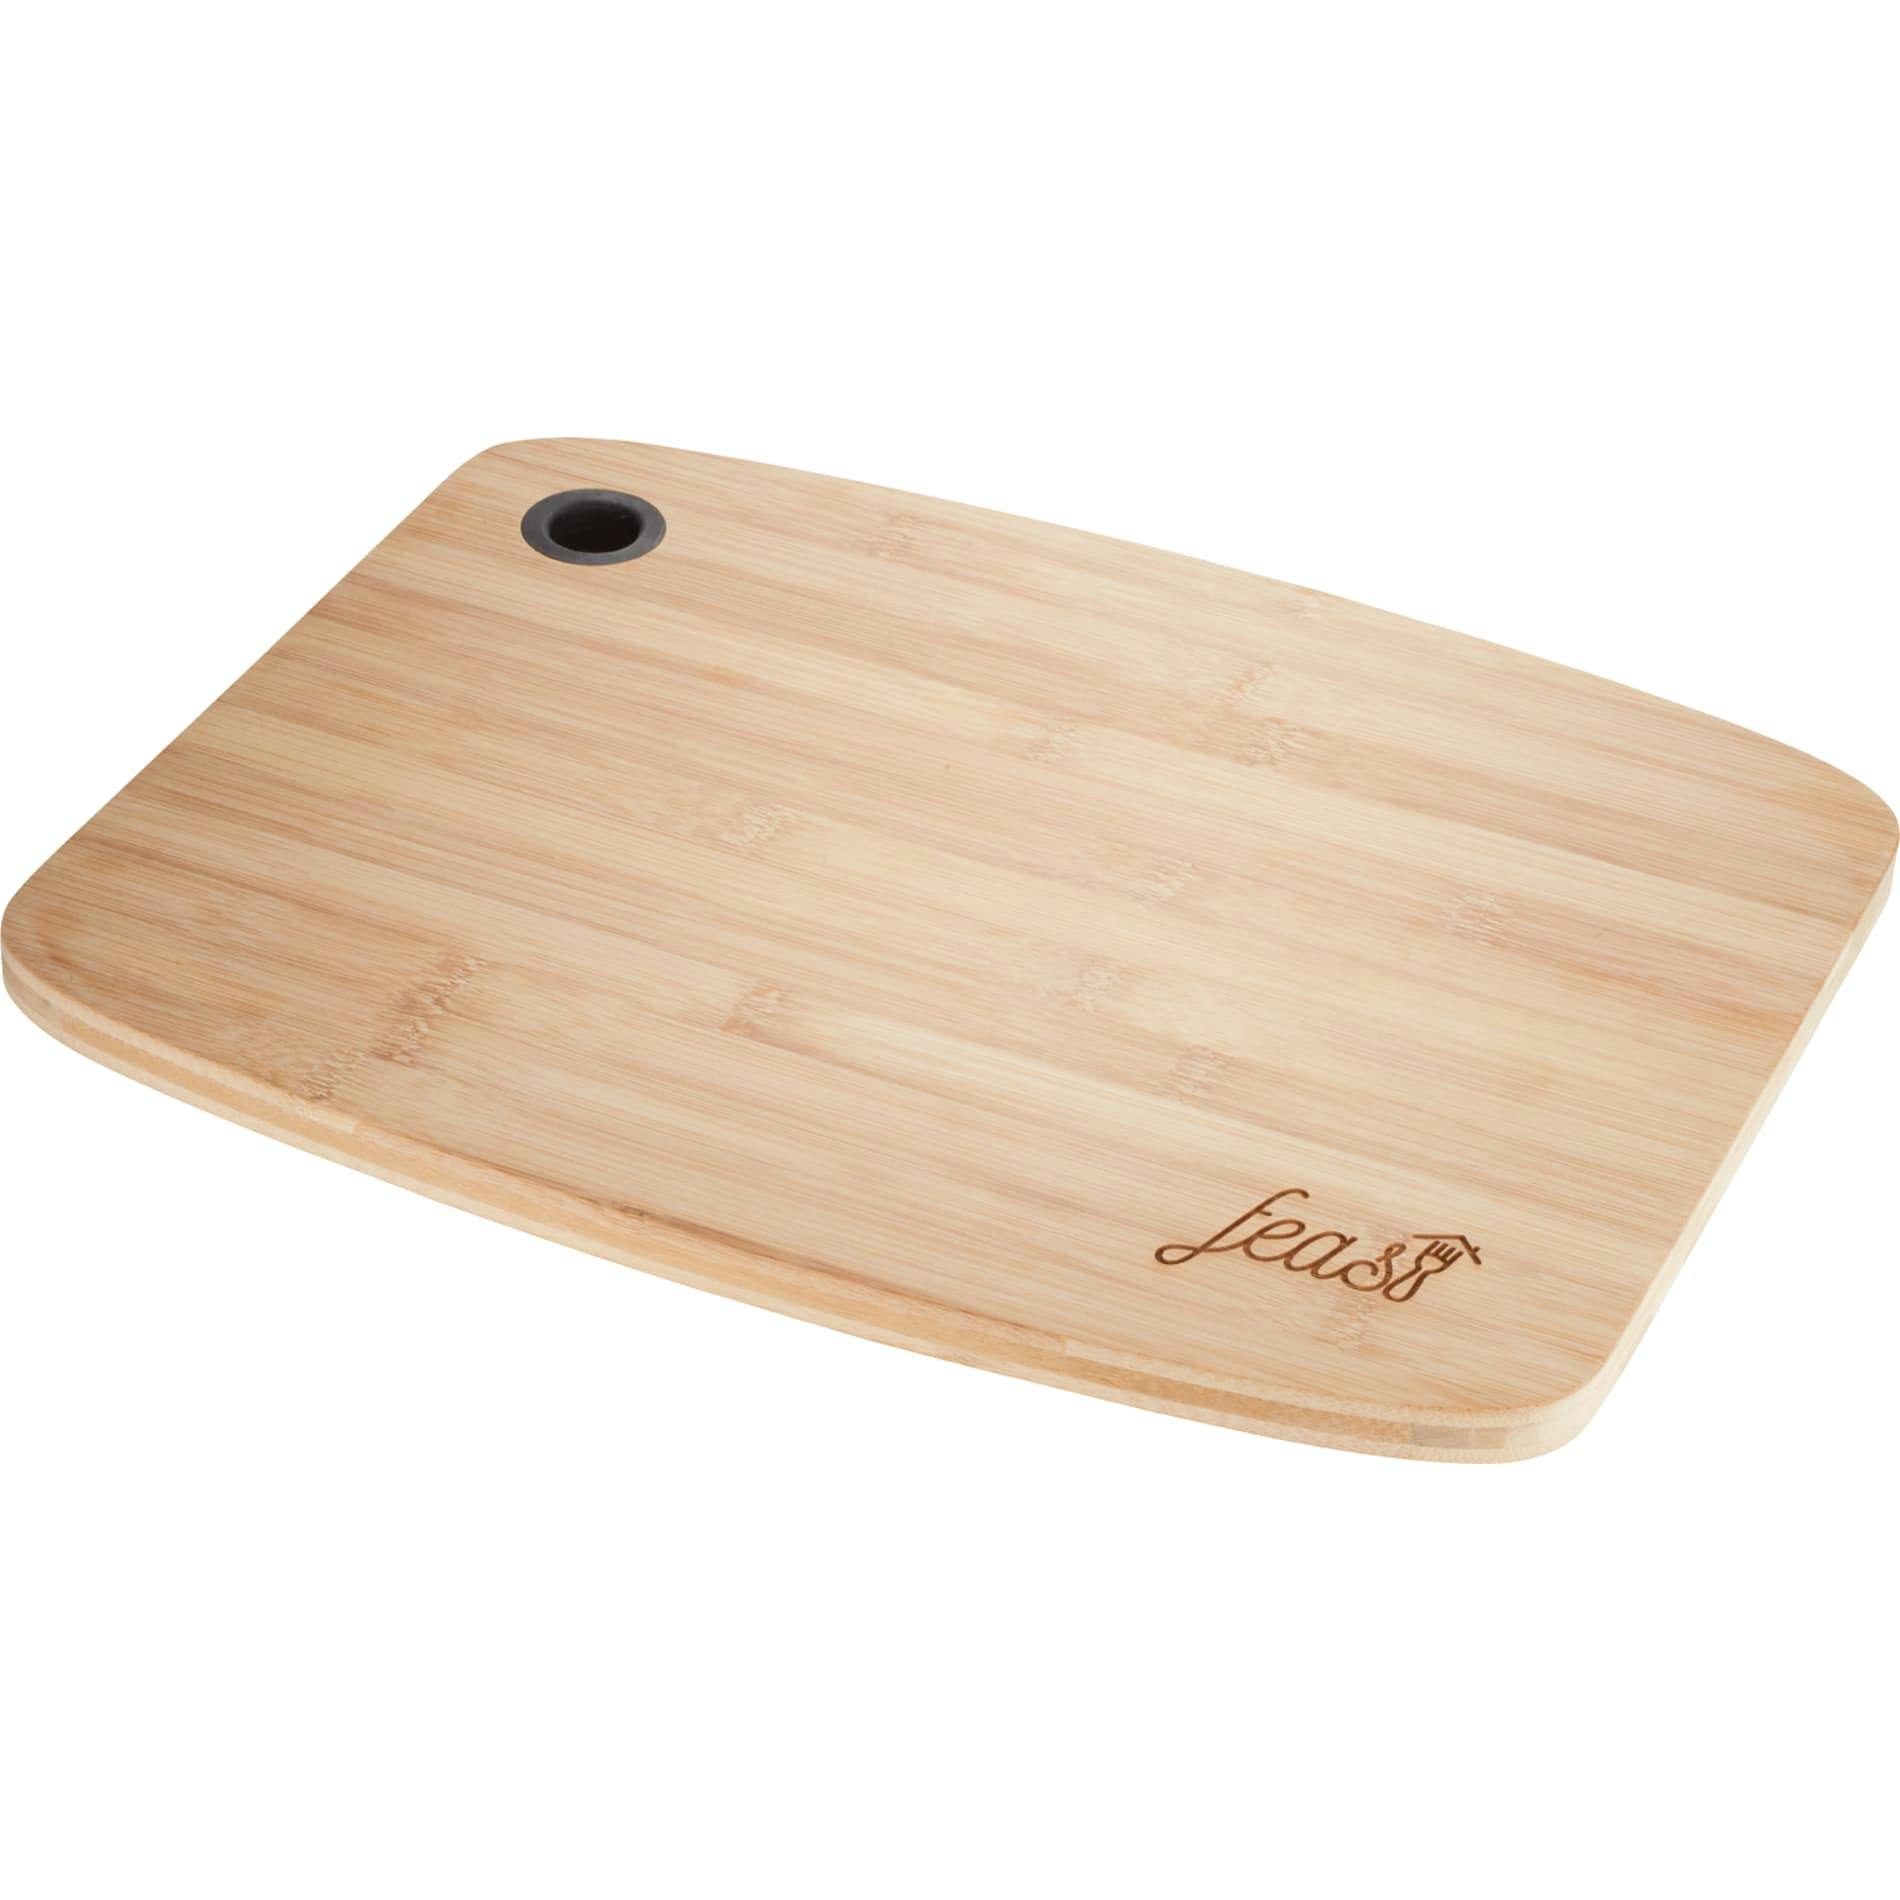 FSC Large Bamboo Cutting Board with Silicone Grip - additional Image 3